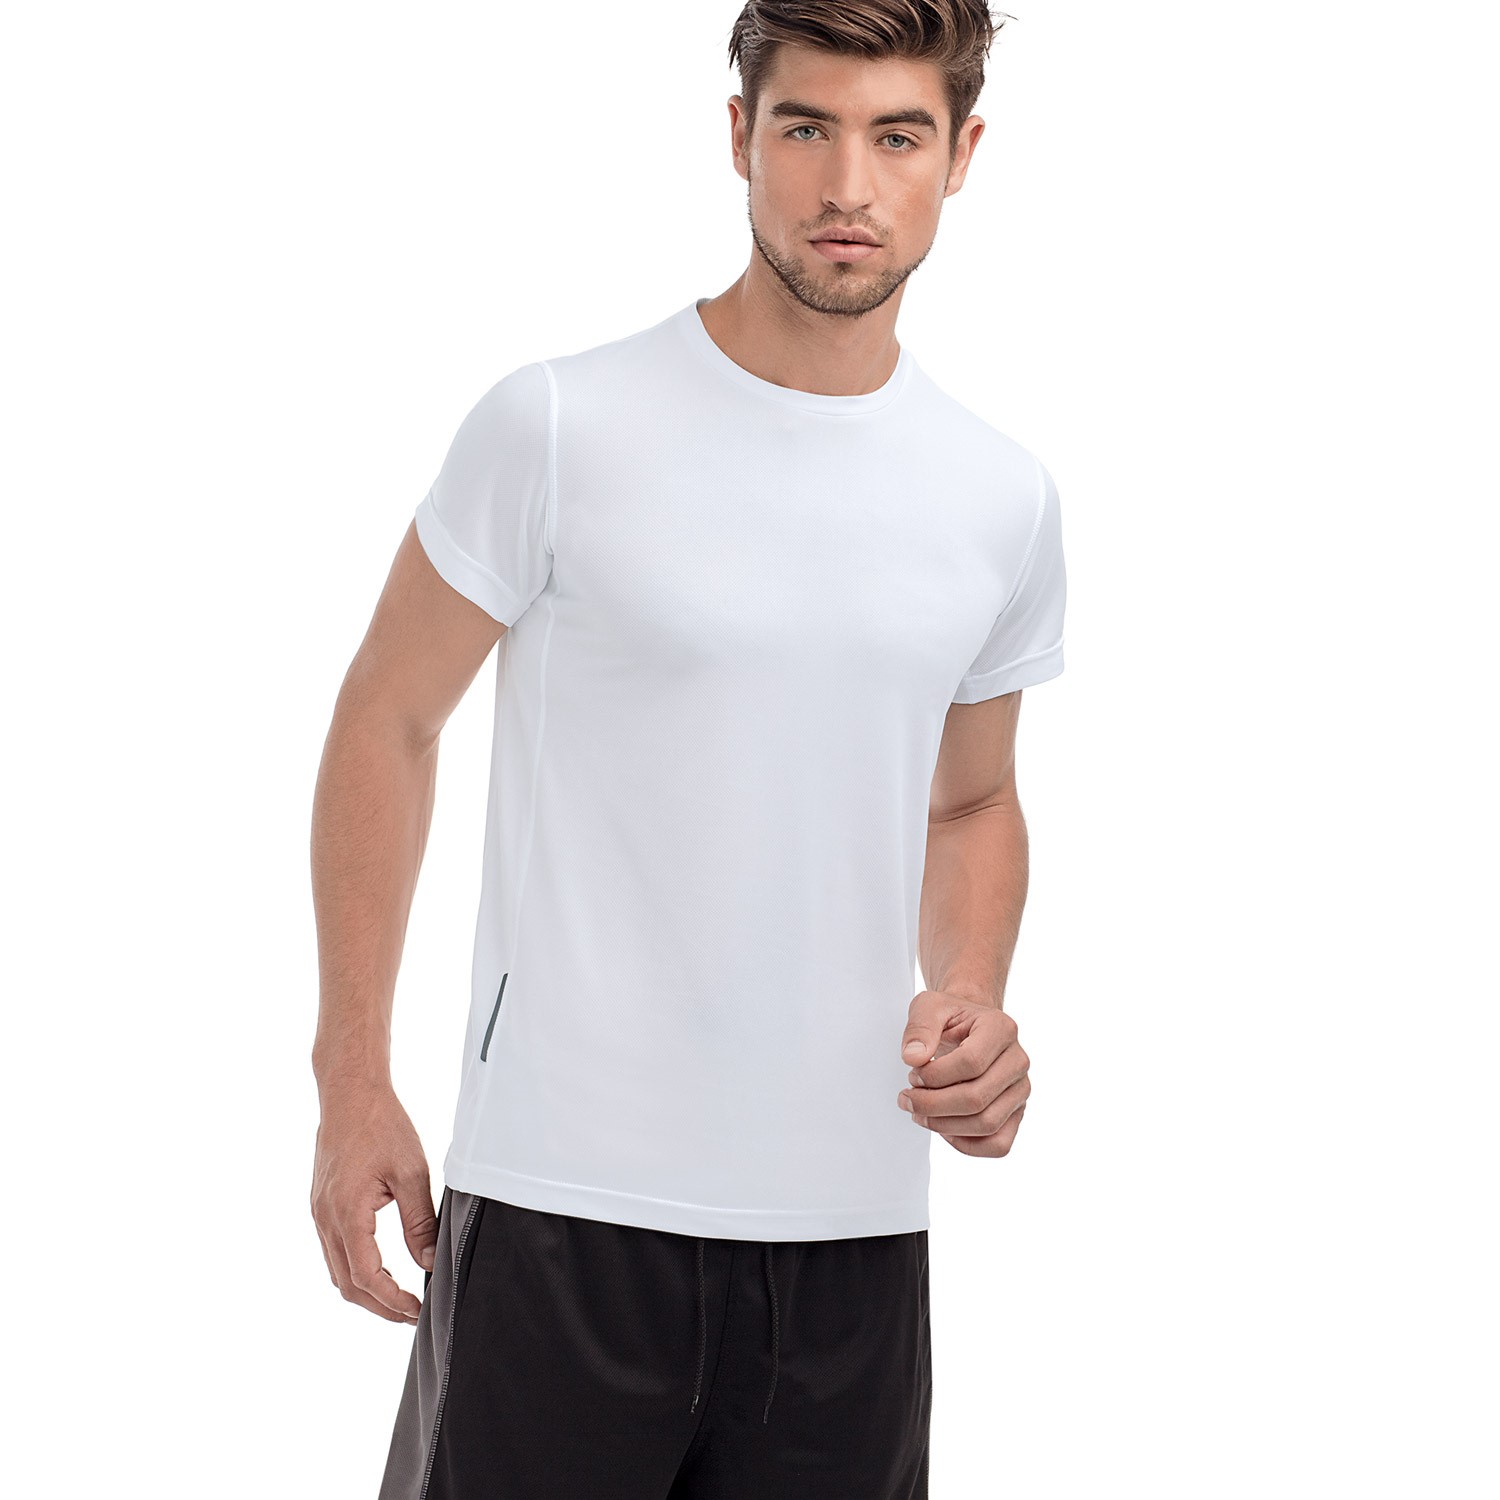 Hanes Sports Performance Crew Neck - T-shirts - Clothing - Timarco.co.uk